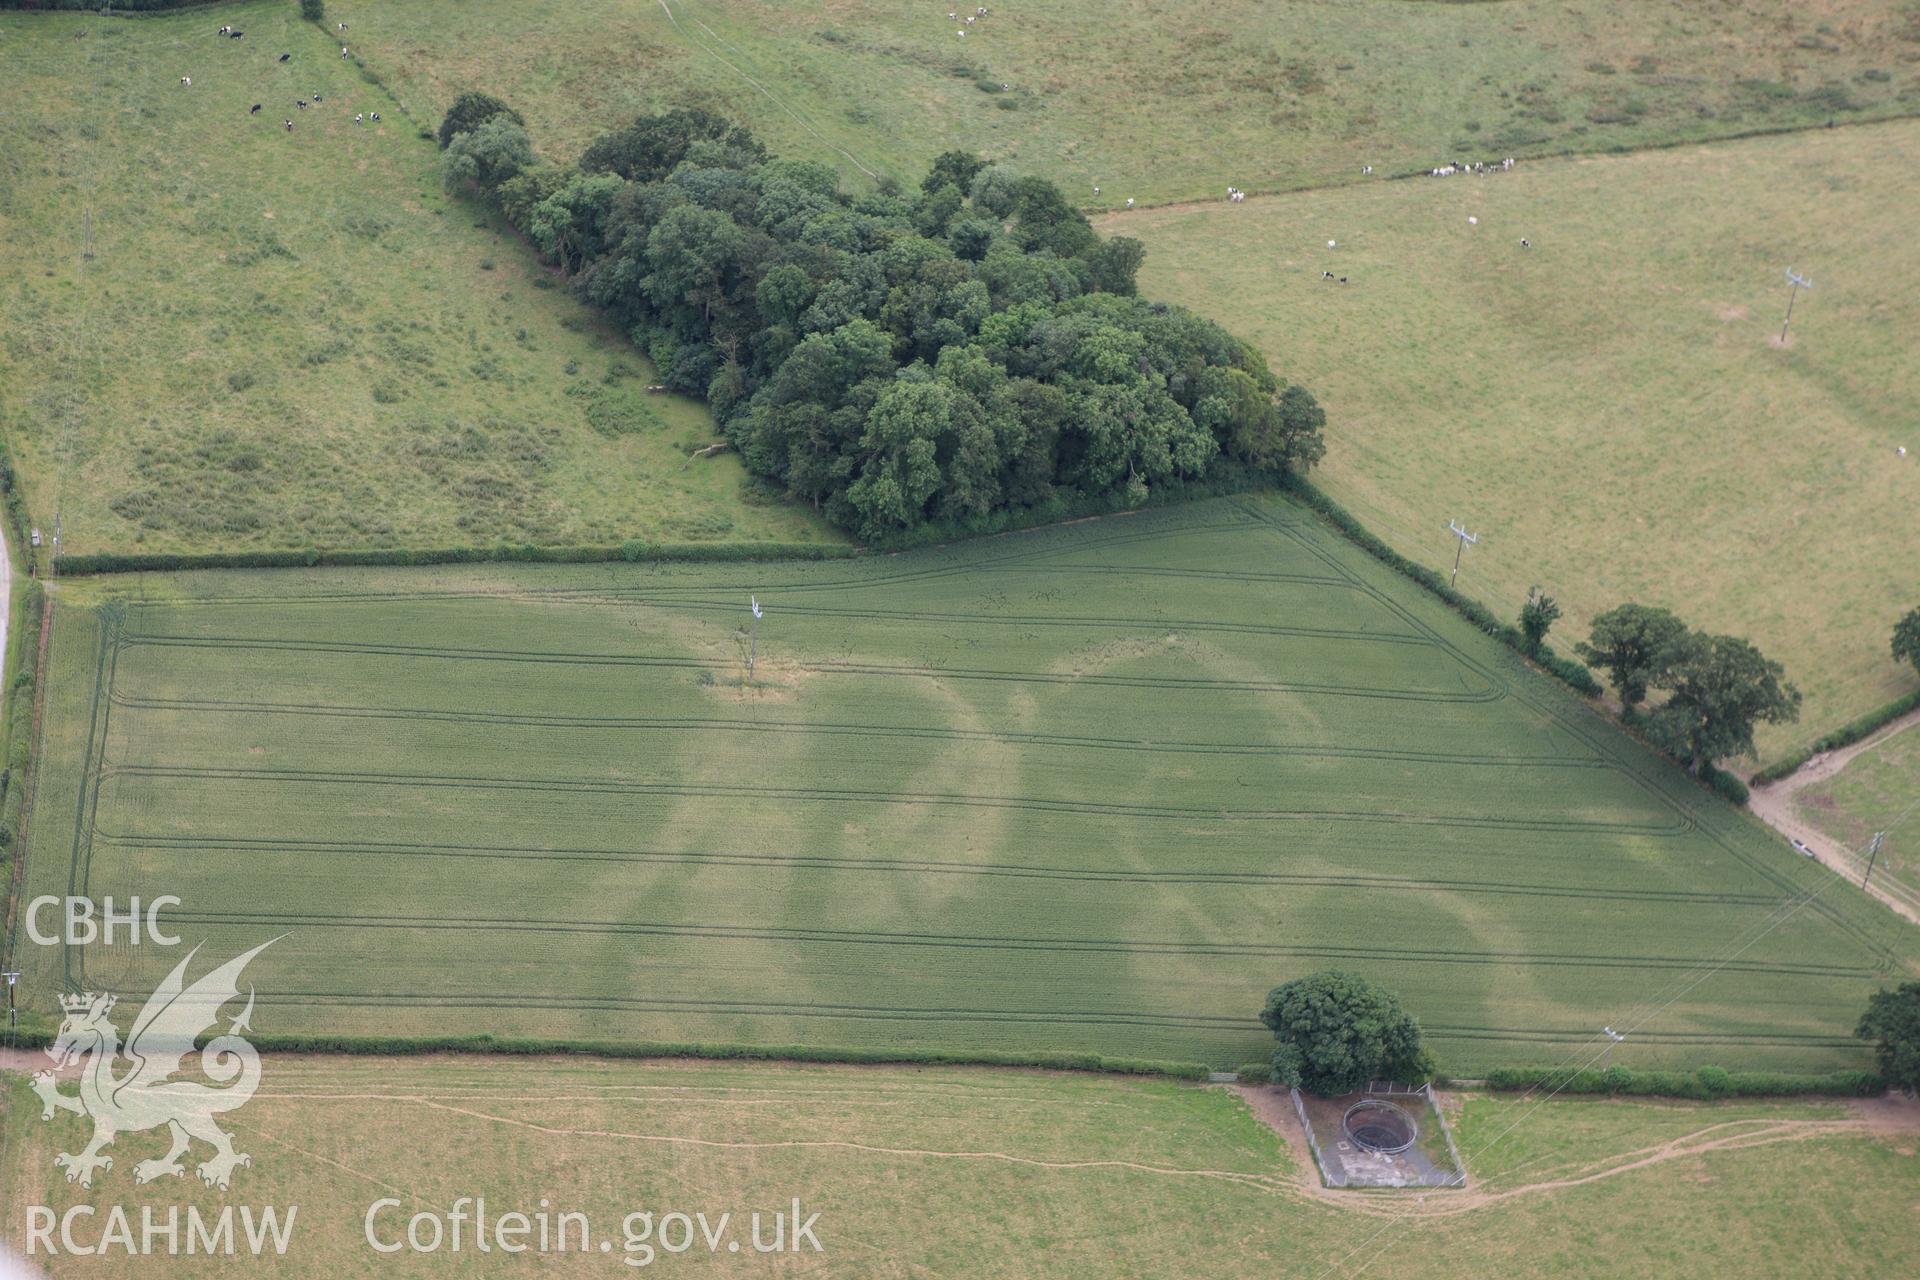 RCAHMW colour oblique aerial photograph of non-archaeological cropmarks in field near Gwern y go. Taken on 08 July 2009 by Toby Driver